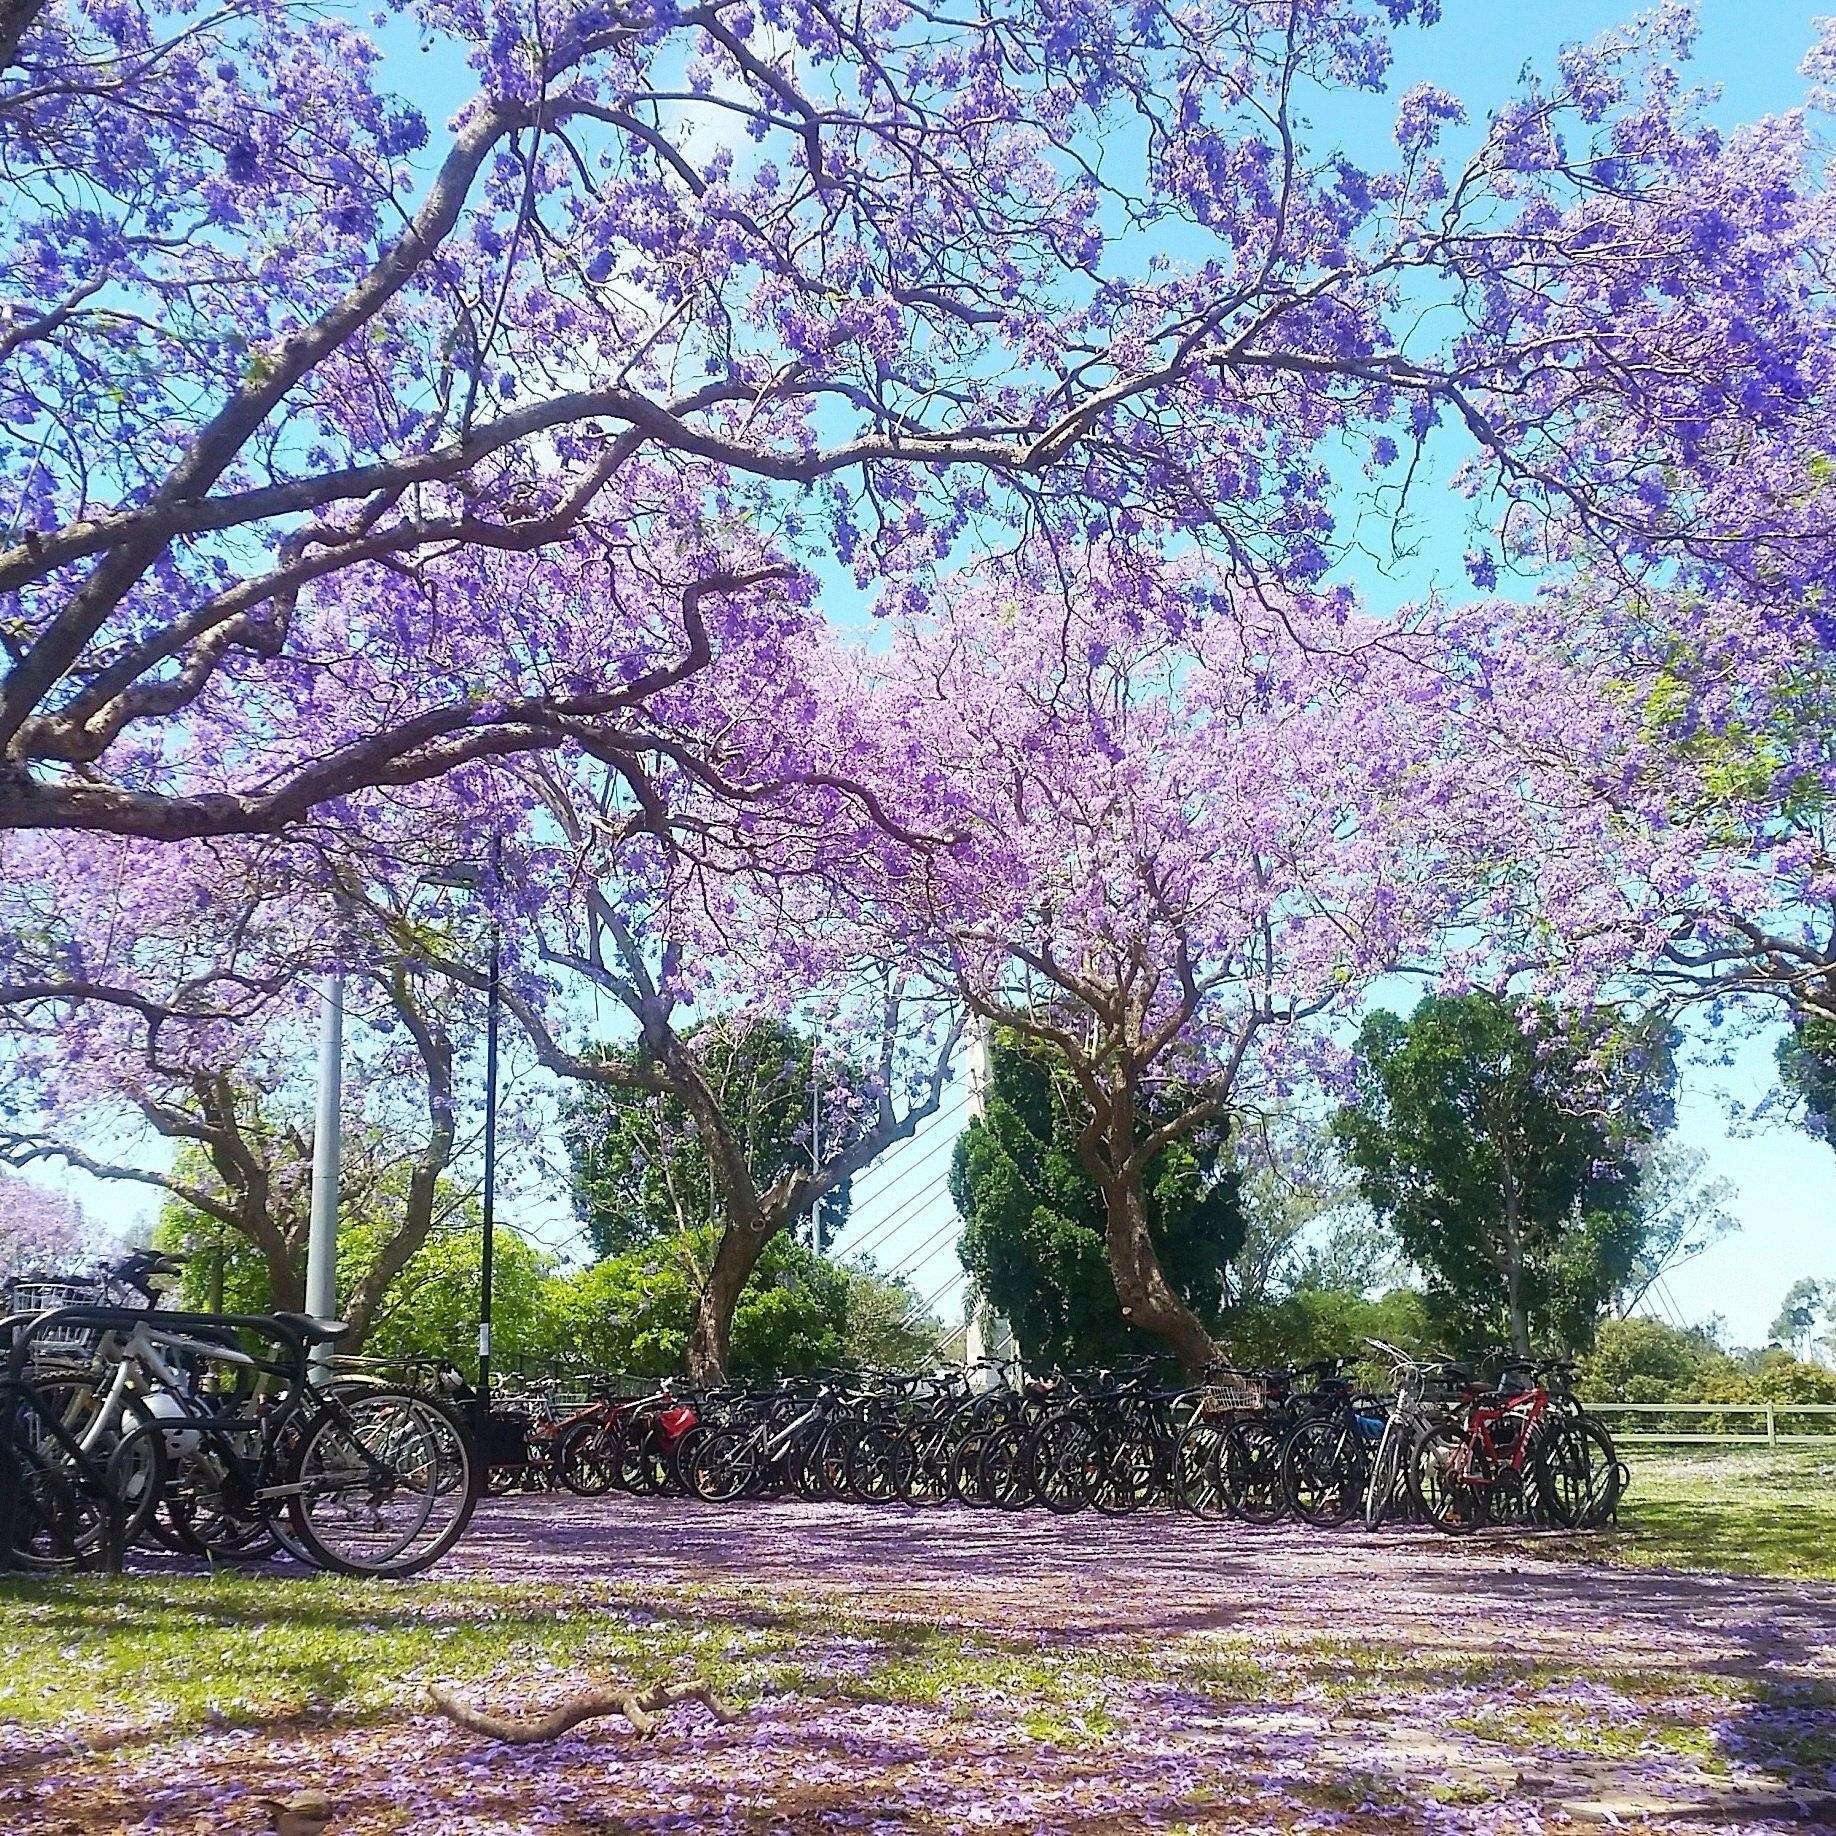 Spring hits Australia in a tidal wave of purple. Urban legend has it, if a Jacaranda flower lands on you, you will fail all your exams #studentlife 